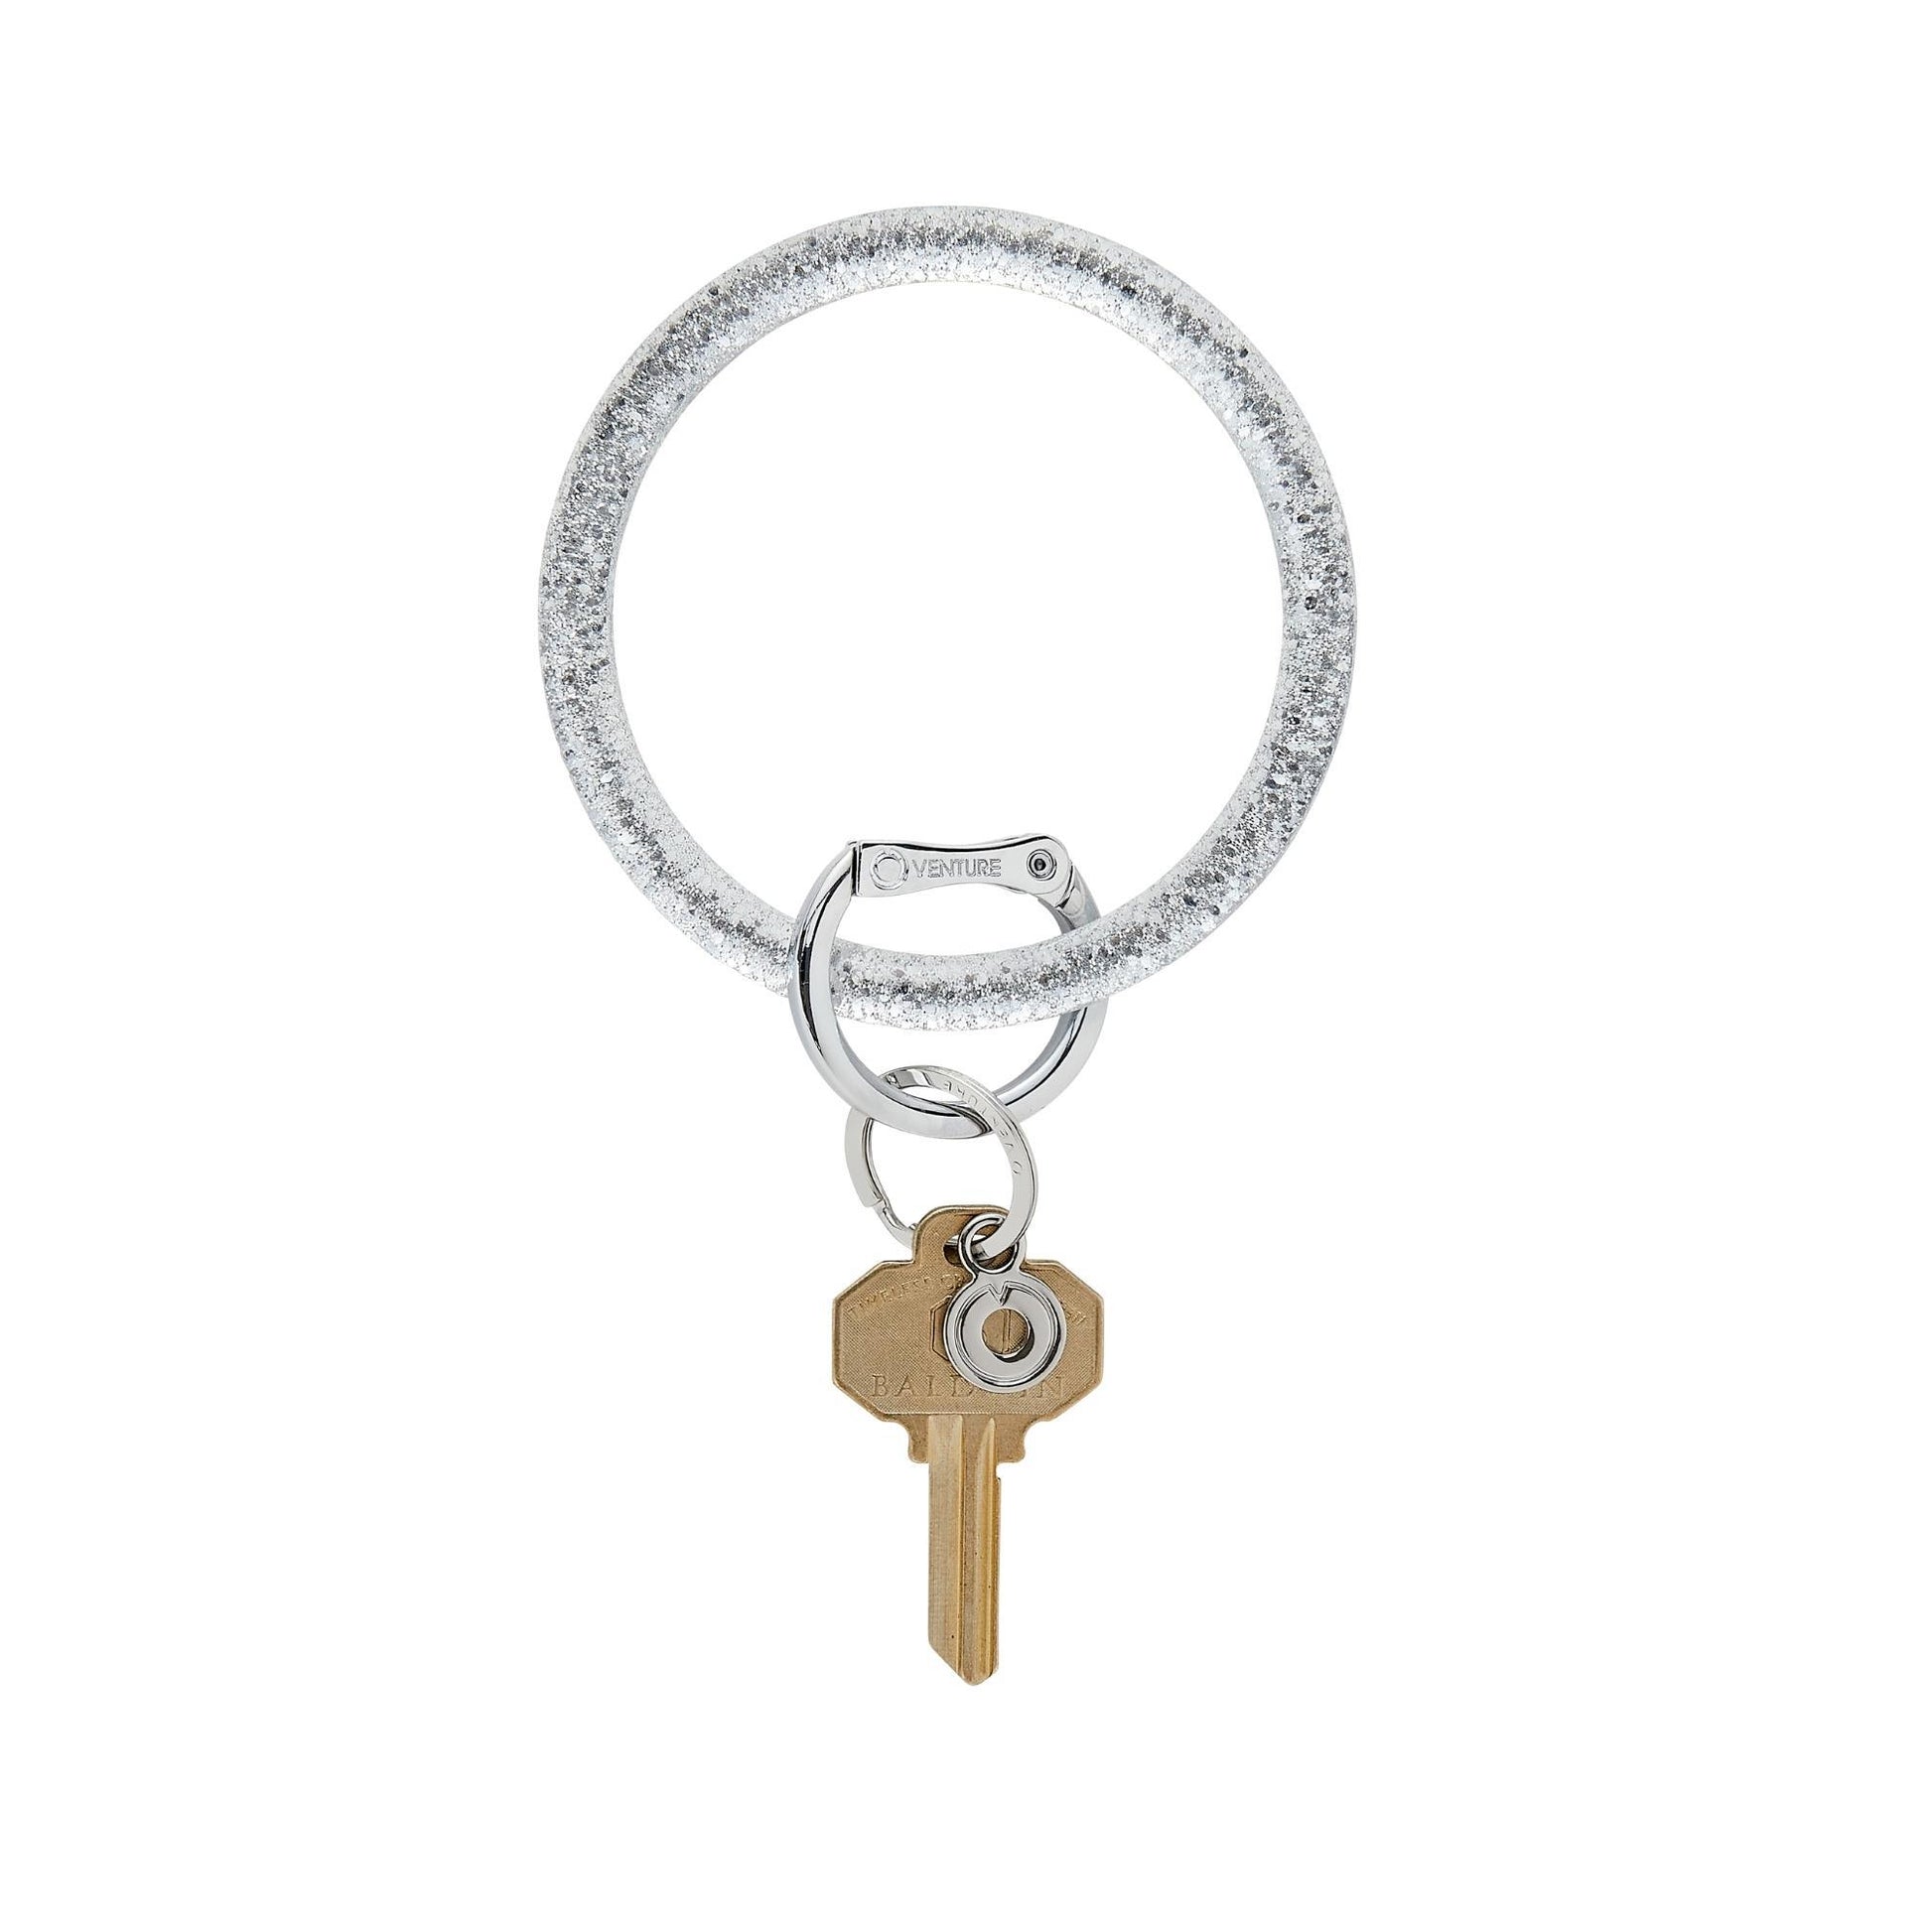 Big O Key Ring in Silver glitter Resin with Oventure locking clasp.